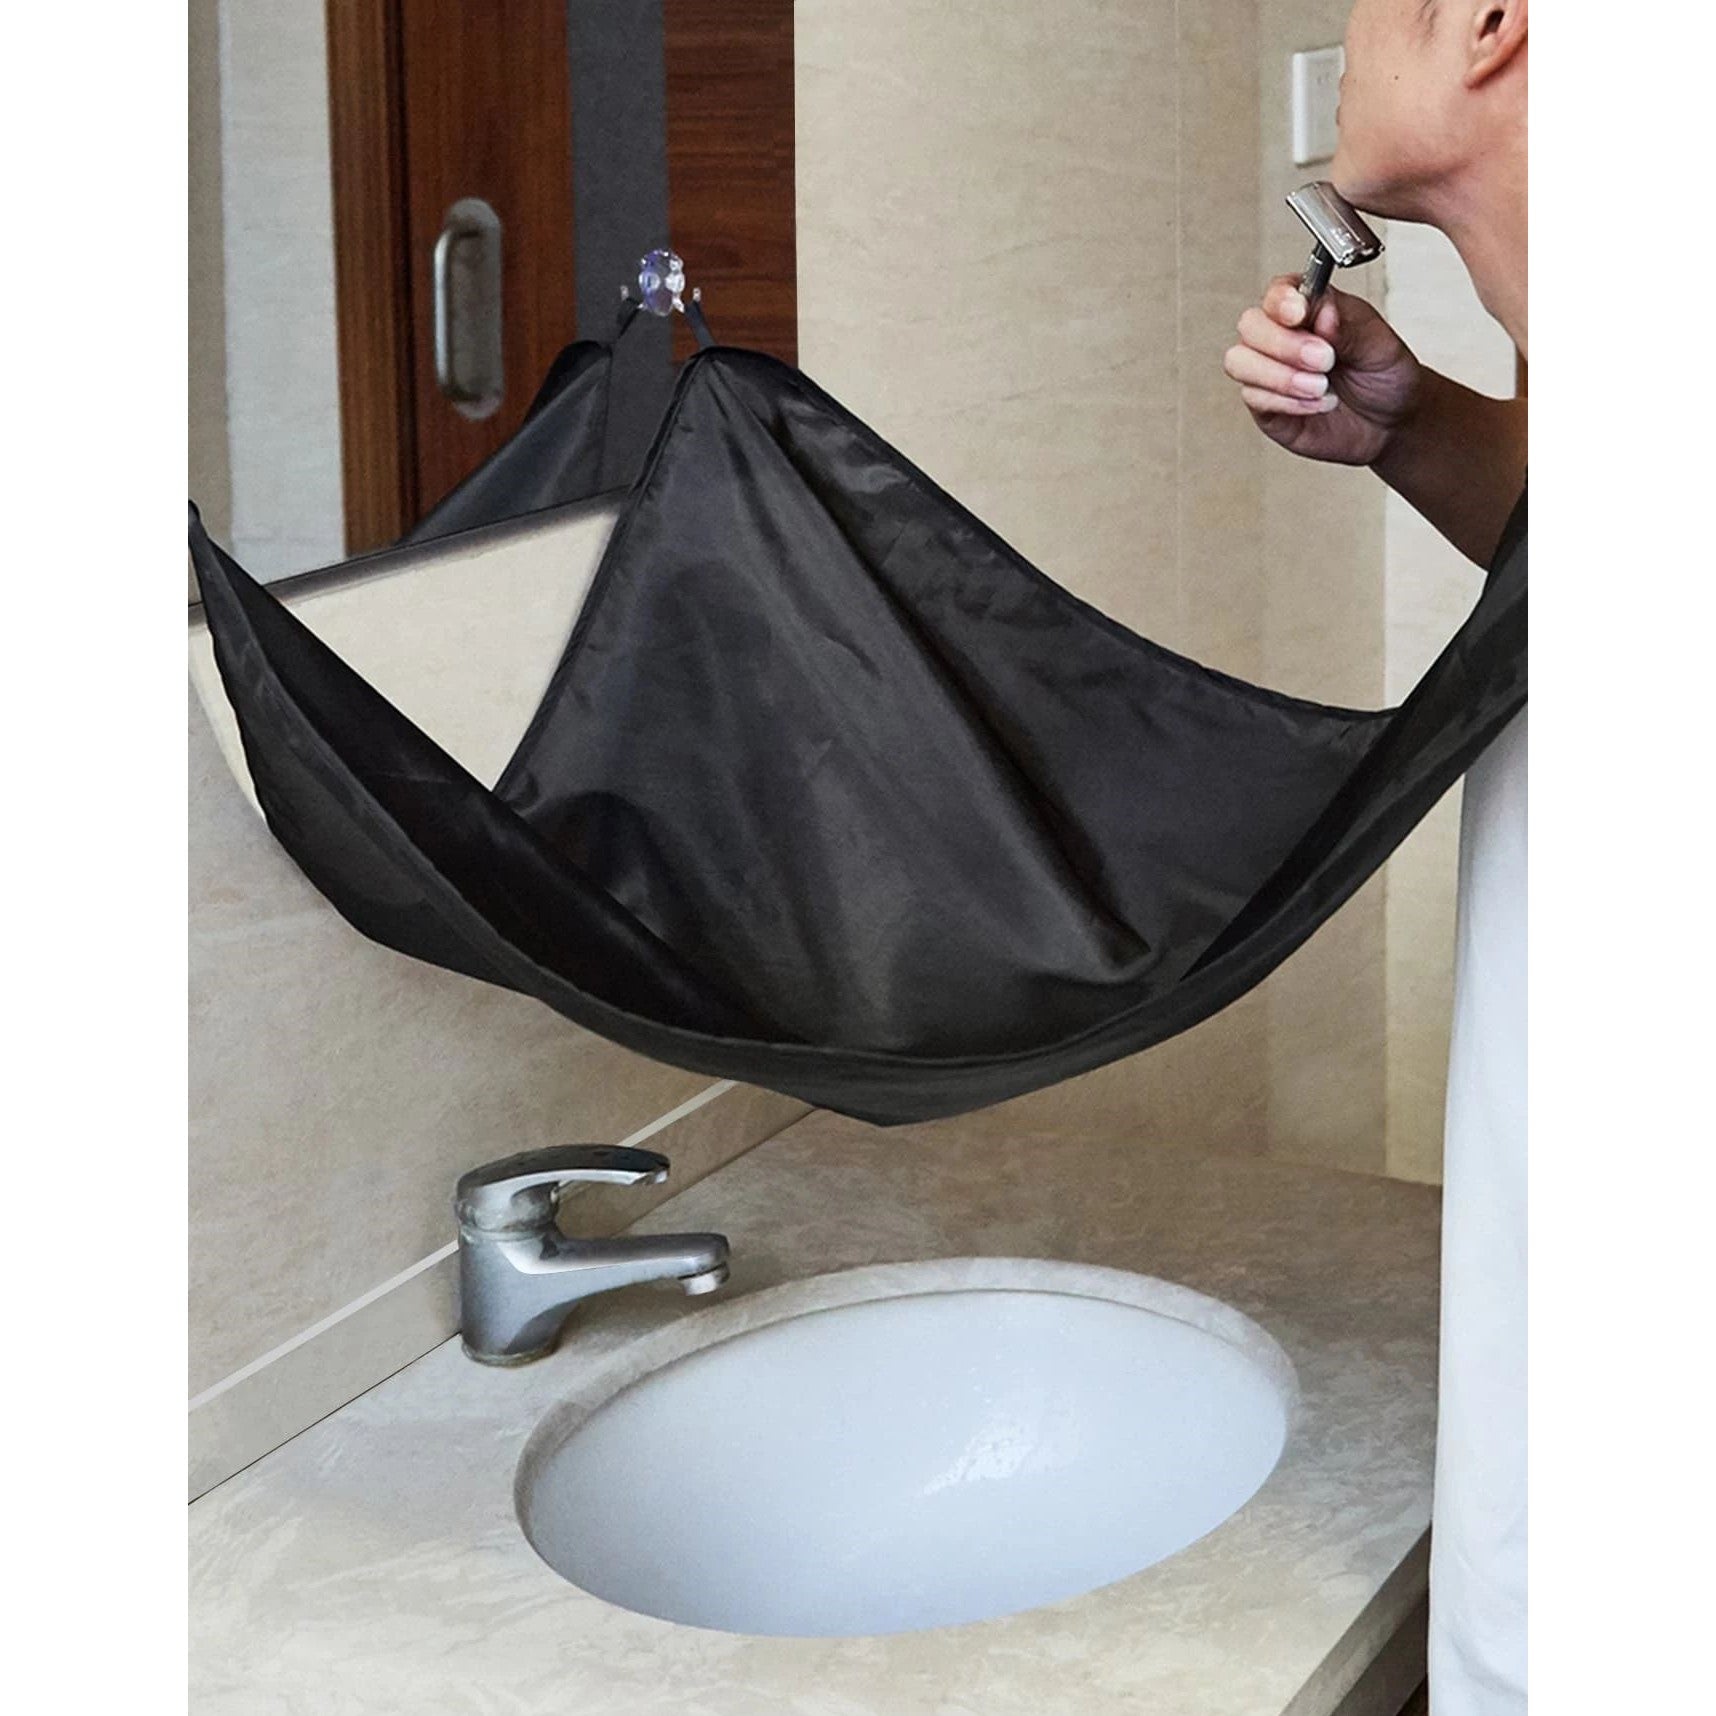 Beard Catcher Cape Apron for Shaving and Grooming & 2pcs Hook